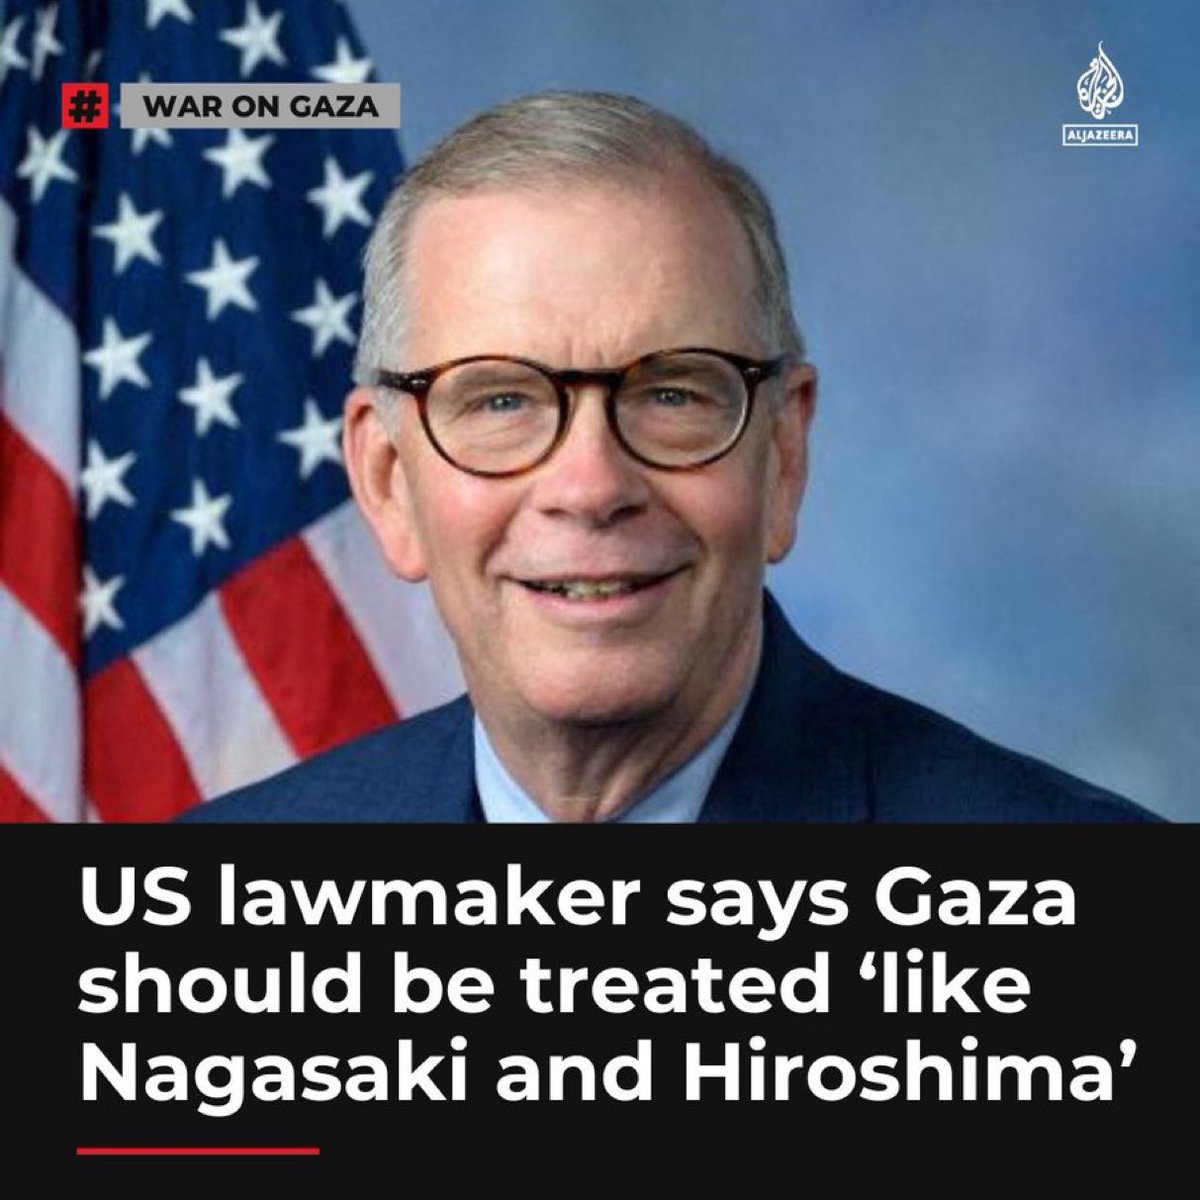 This is the genocidal perverse congressman @RepWalberg who called to wipe out #Gaza just like Nagasaki and Hiroshima | unseat him now!